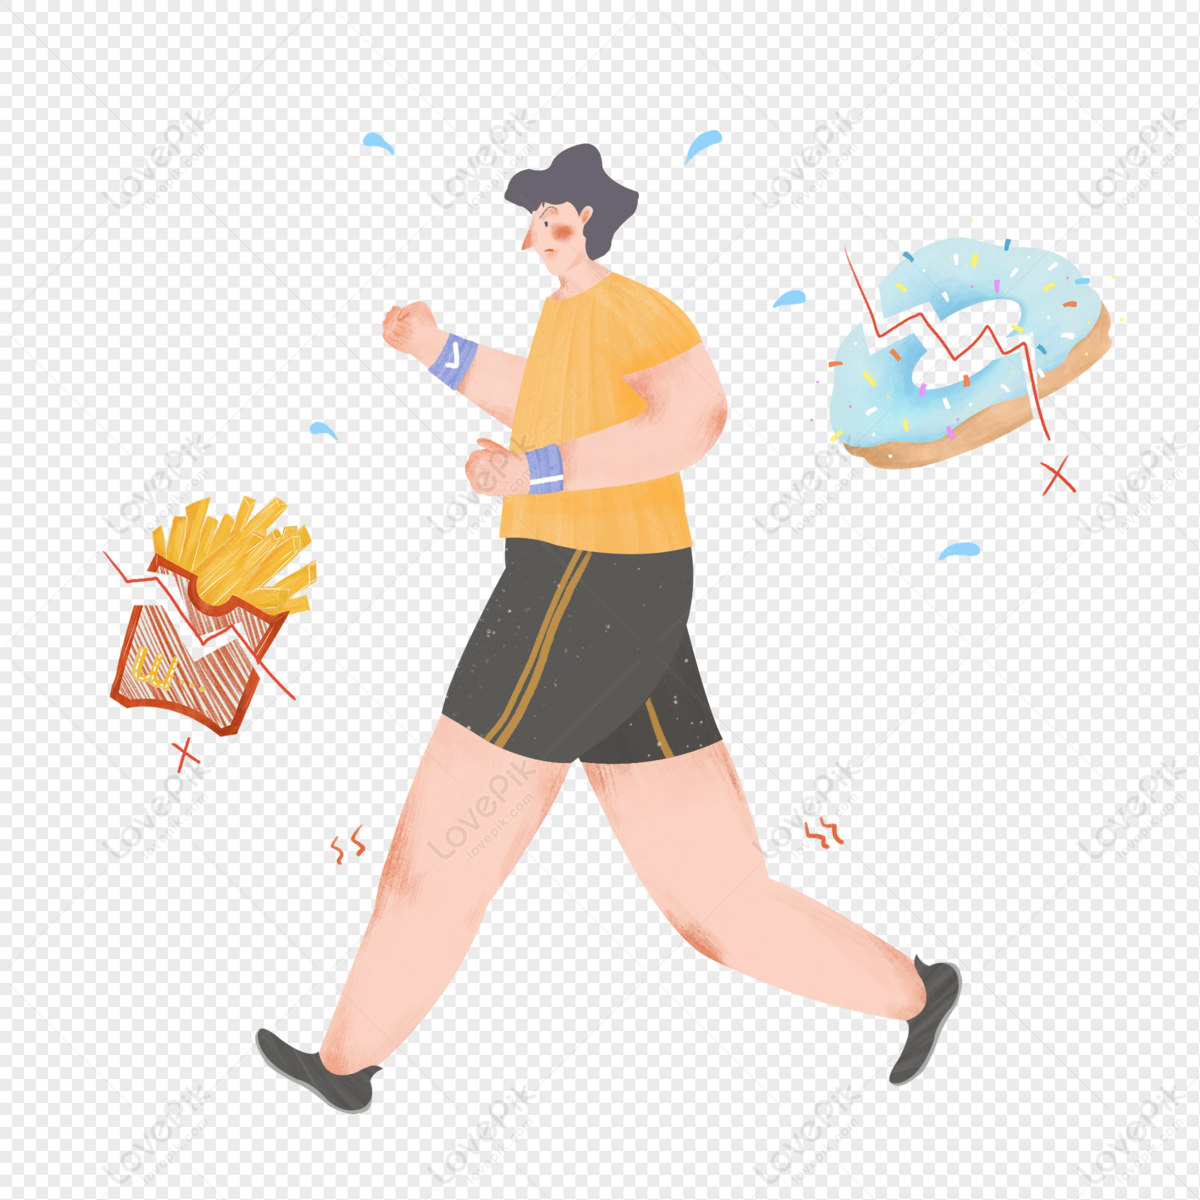 Running Weight Loss Exercise Fitness Cartoon Character Hand Draw PNG  Picture And Clipart Image For Free Download - Lovepik | 401282925